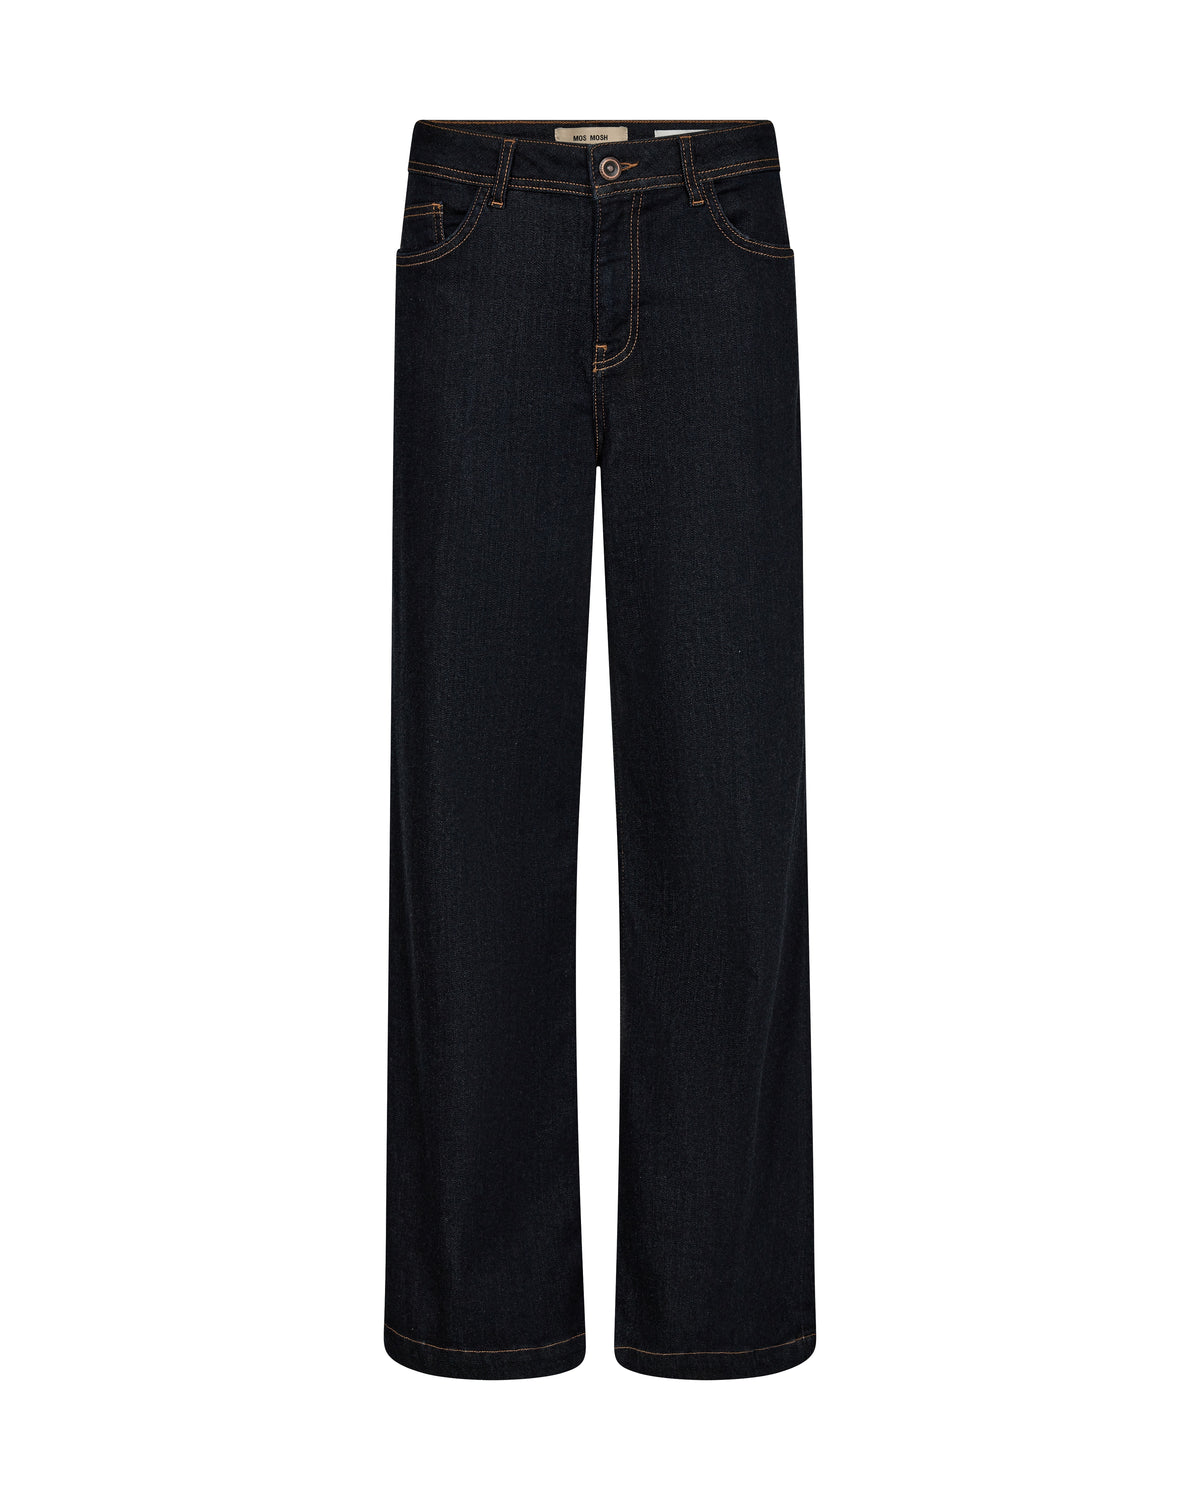 straight wide leg high rise dark blue jeans with contrast stitching